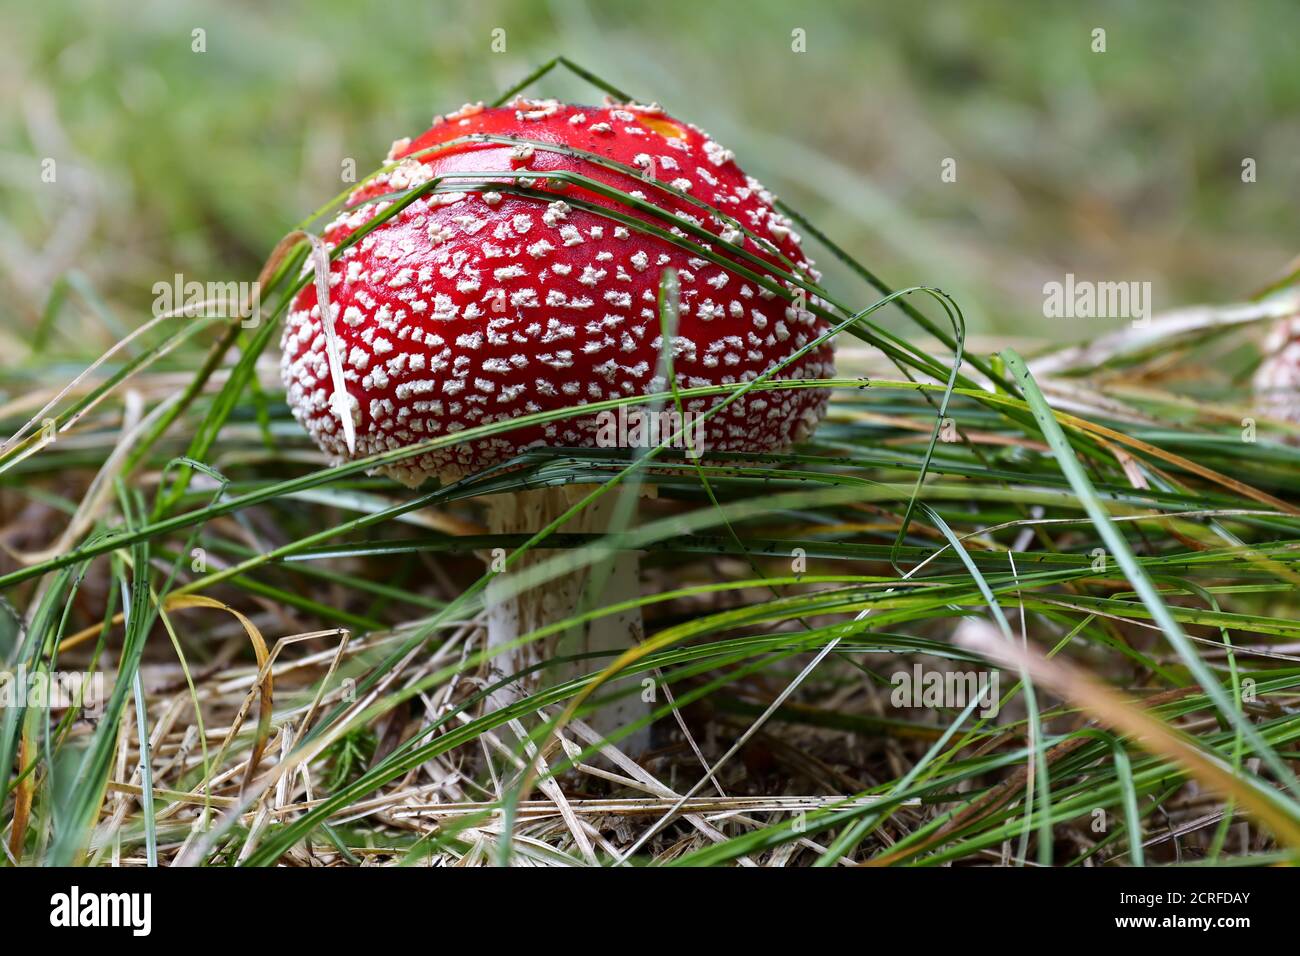 Red toadstool growing in the grass - Amanita muscaria, poisonous fungus Stock Photo